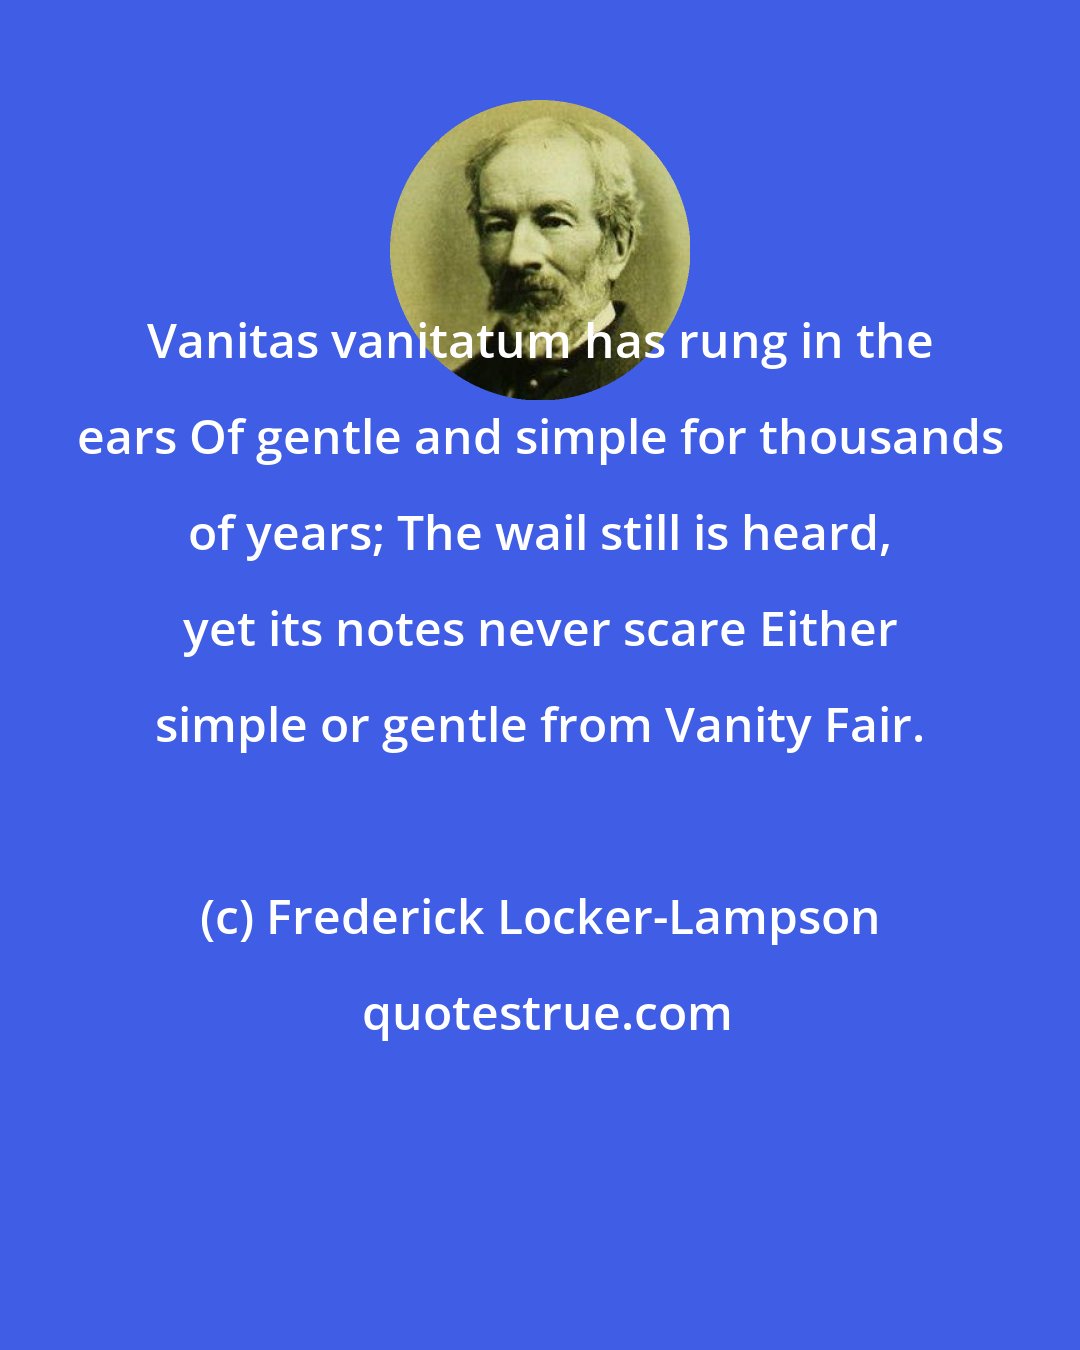 Frederick Locker-Lampson: Vanitas vanitatum has rung in the ears Of gentle and simple for thousands of years; The wail still is heard, yet its notes never scare Either simple or gentle from Vanity Fair.